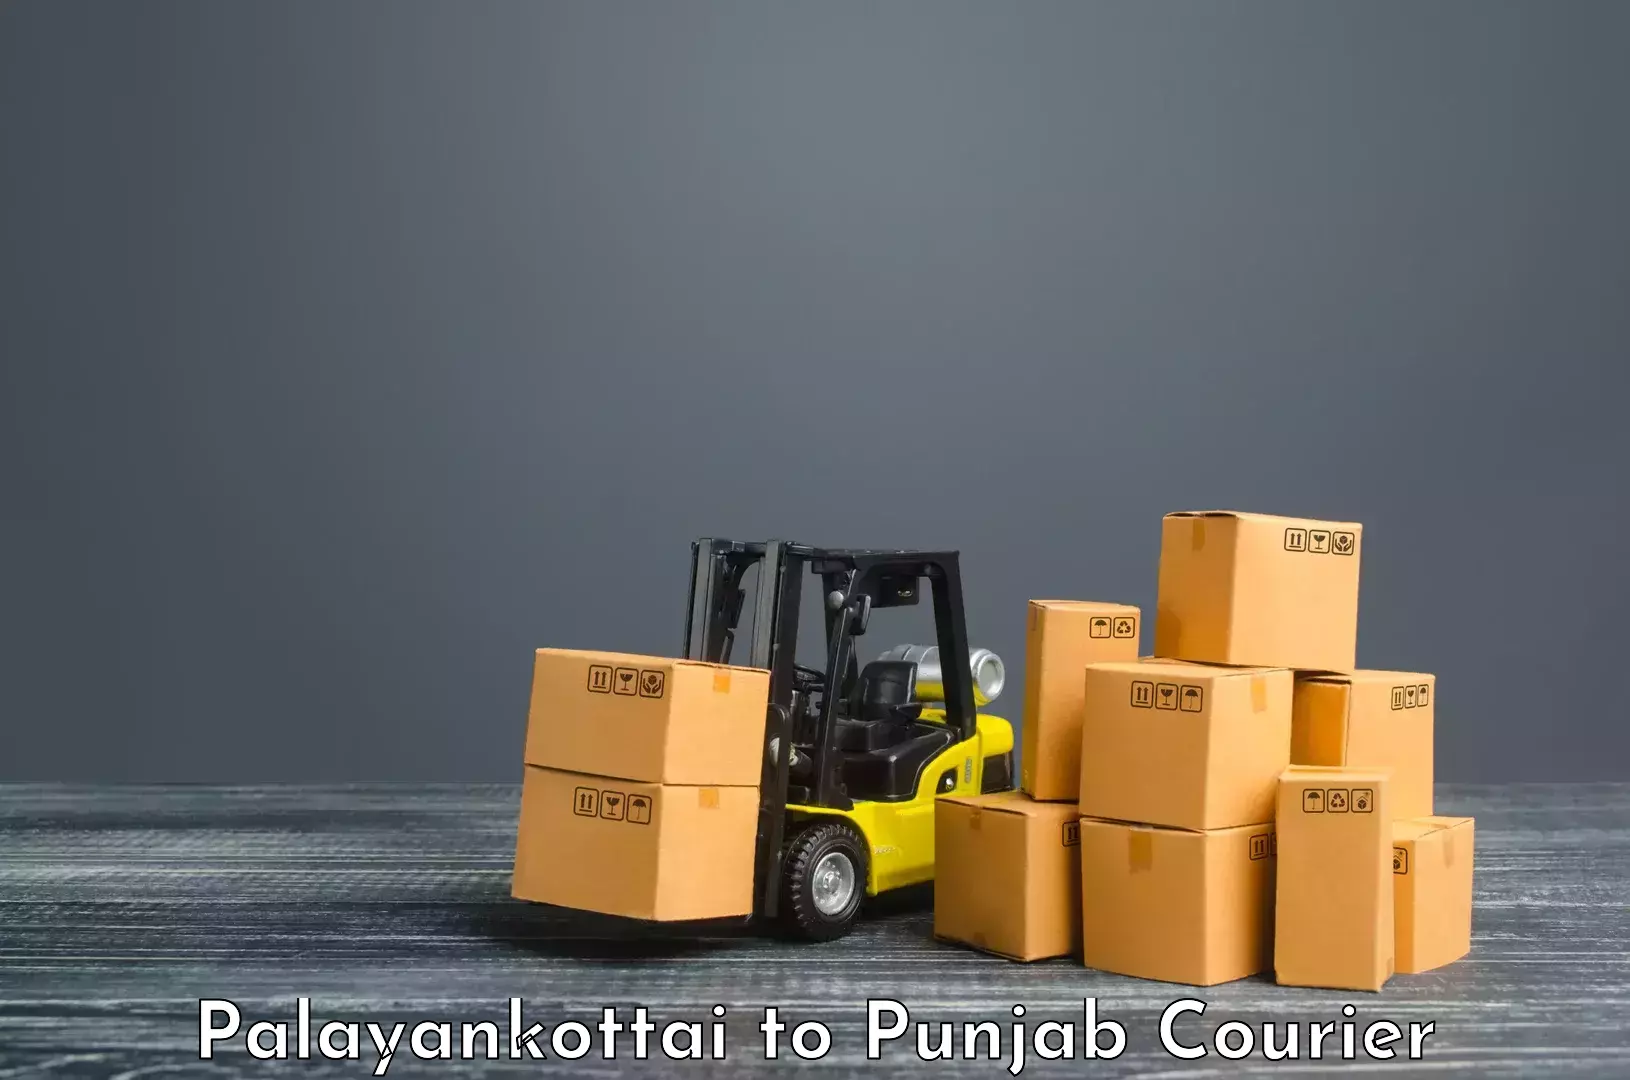 Global courier networks Palayankottai to Punjab